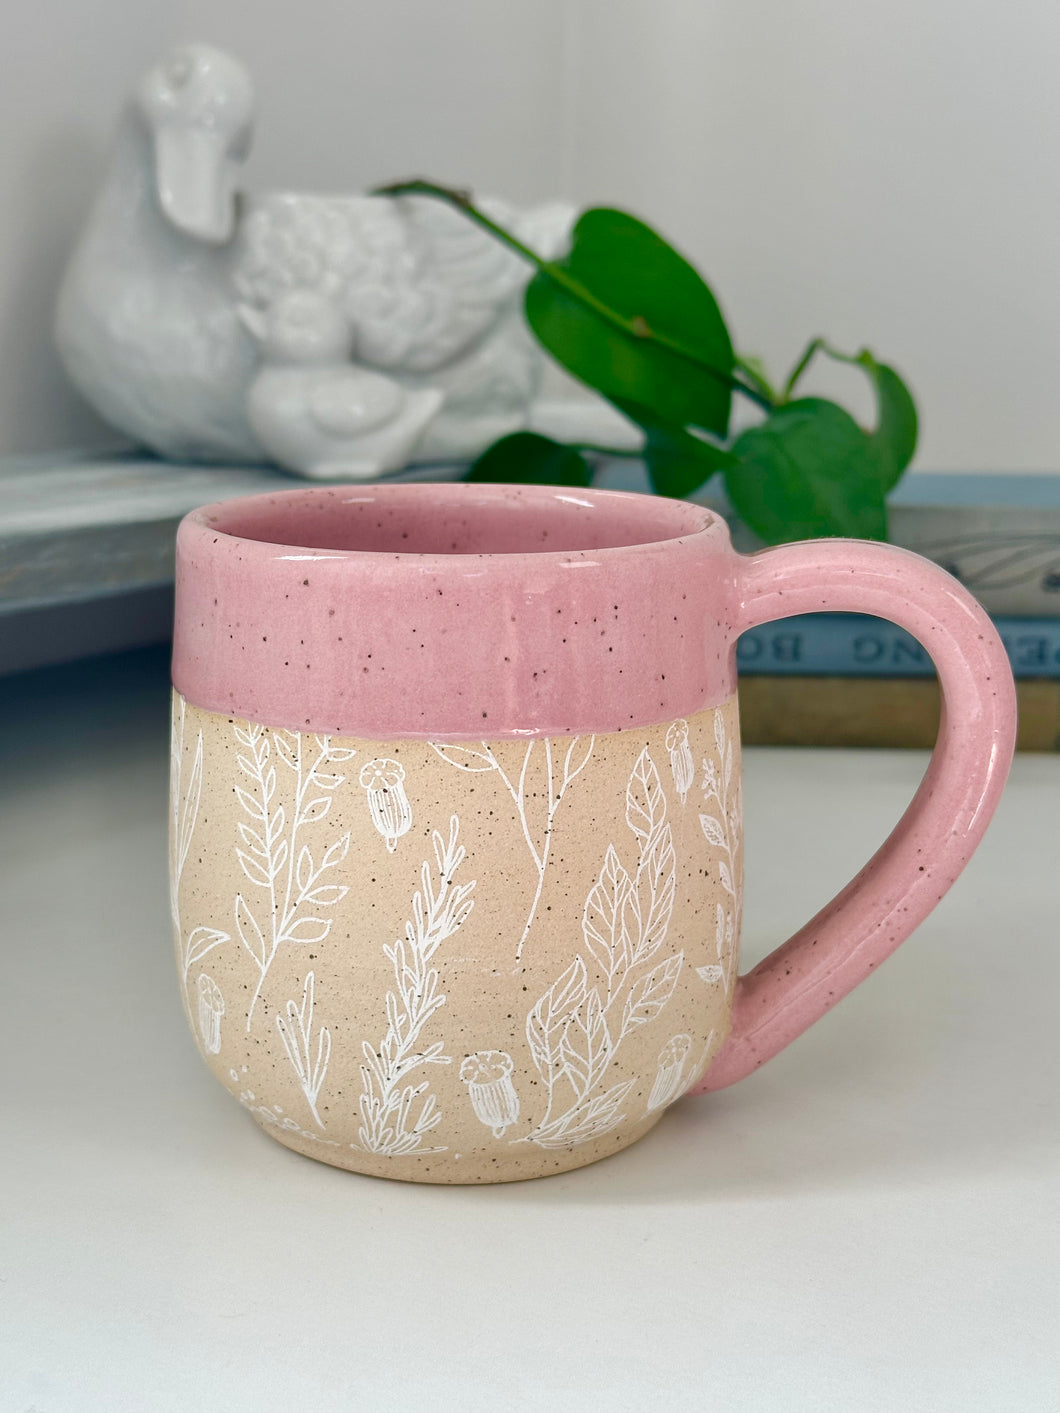 #012 - 18 oz. White floral pattern on bare clay, pink glazed rim and interior